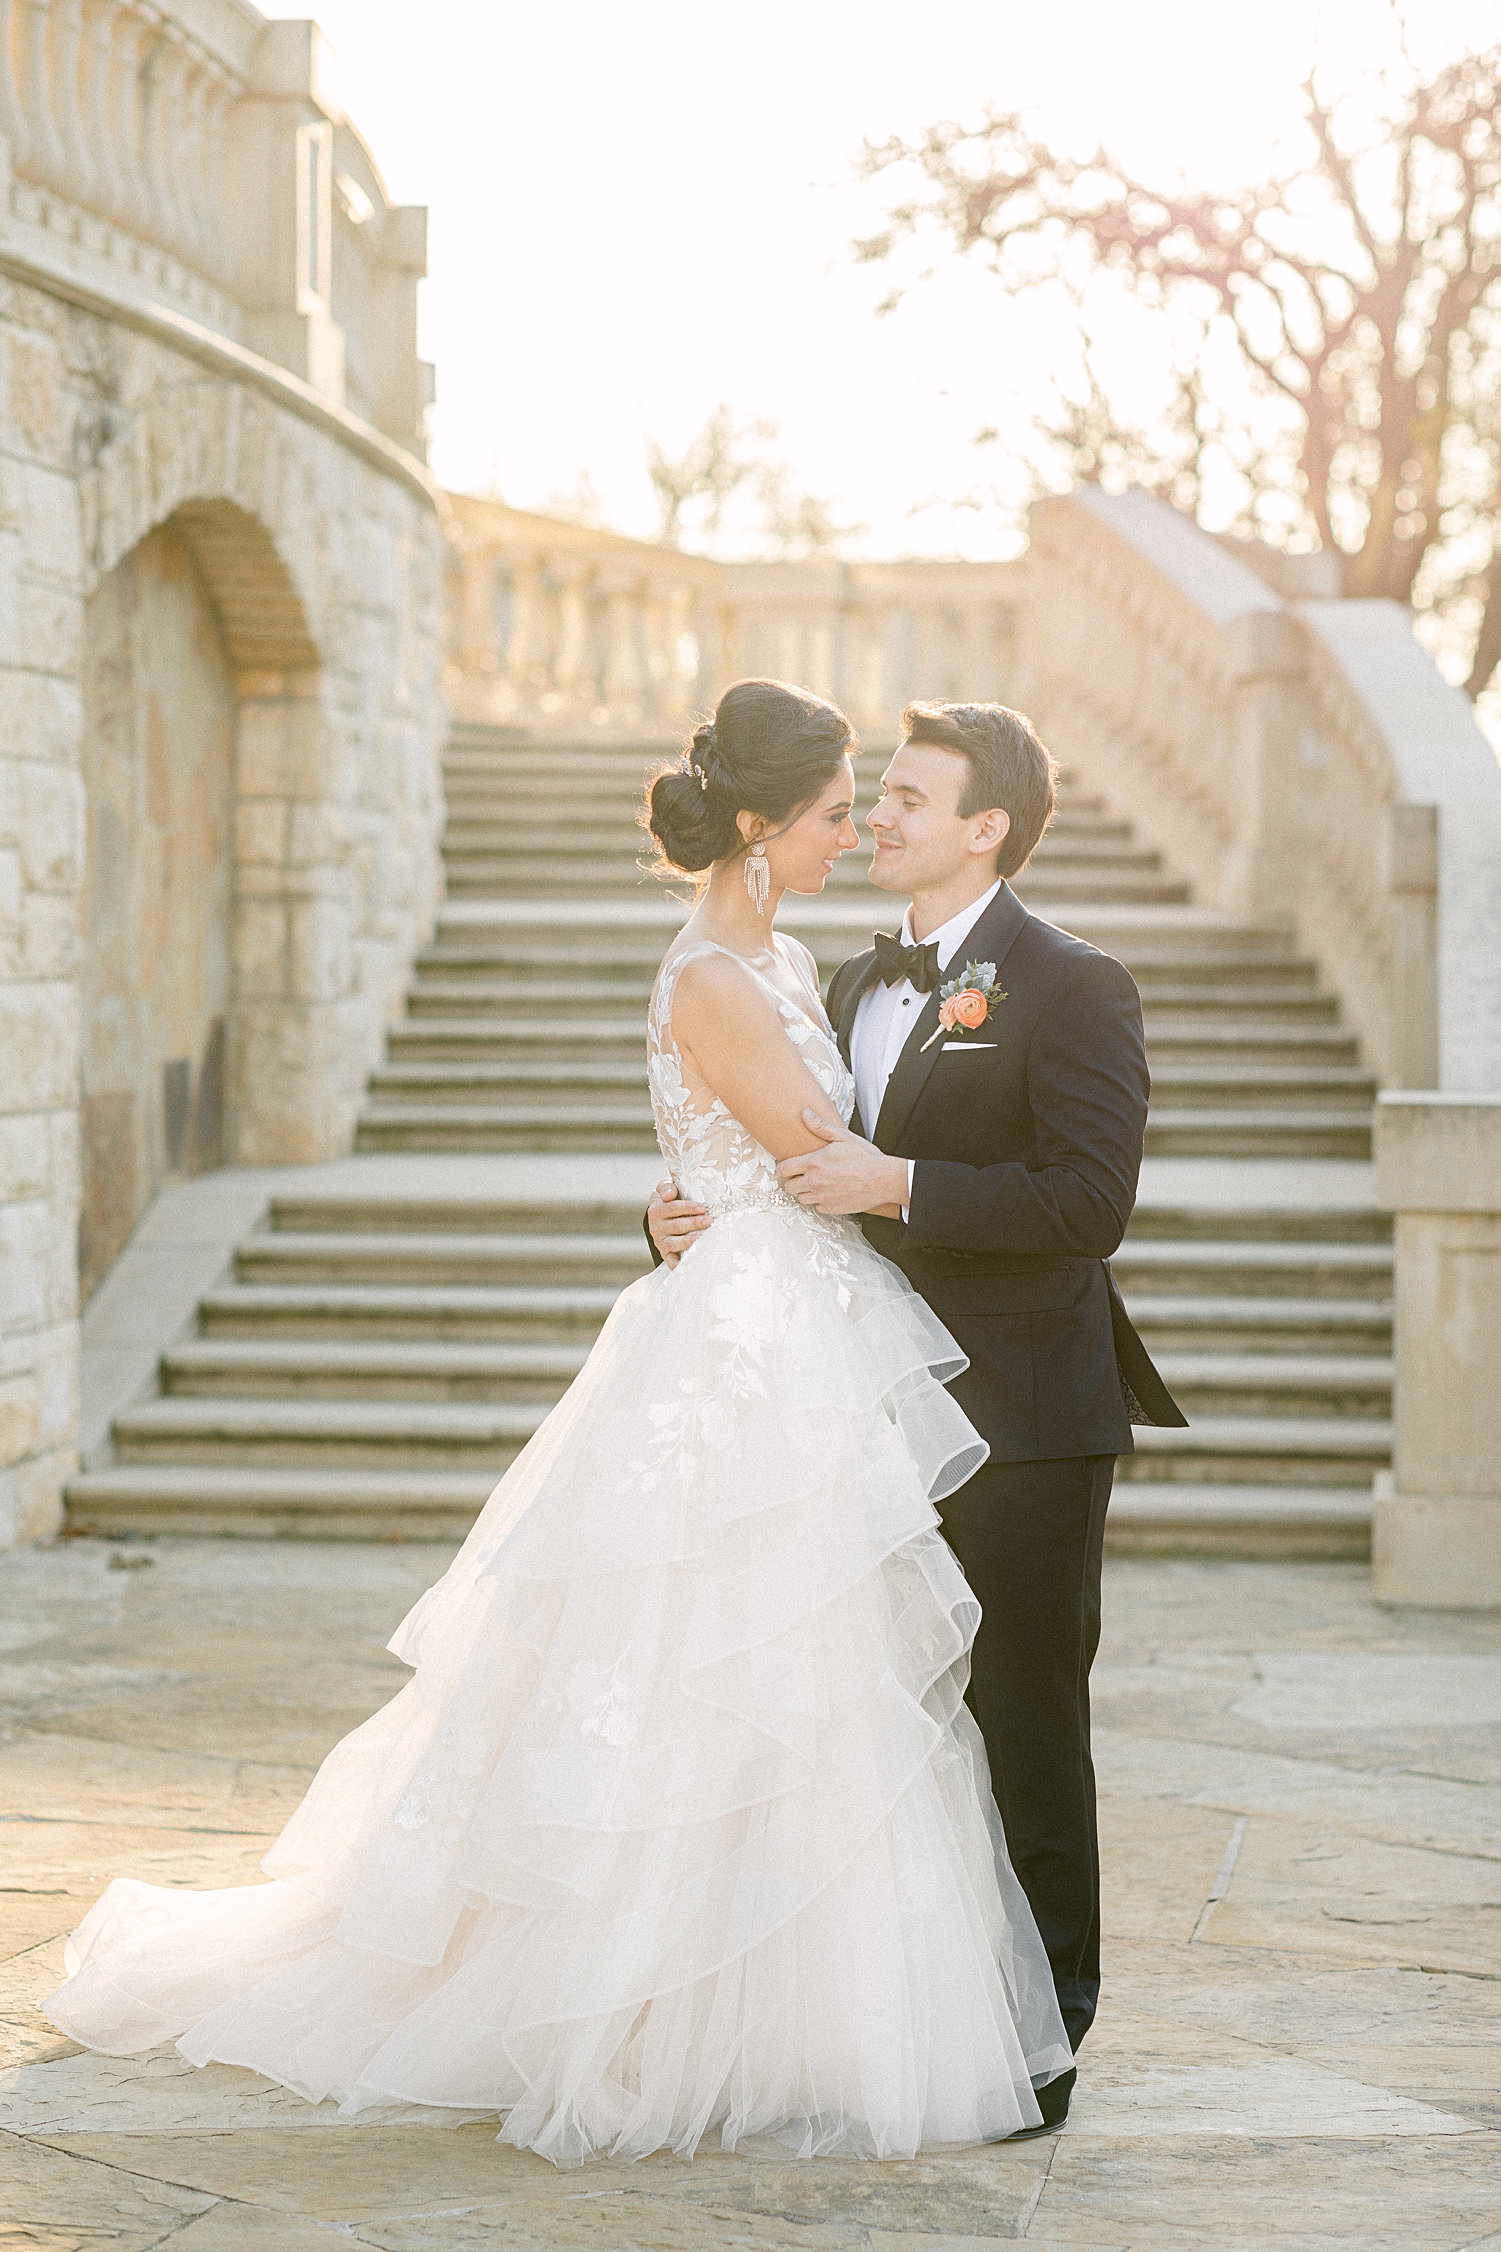 Bride and groom hugging in front of outdoor staircase at french estate wedding at sunset